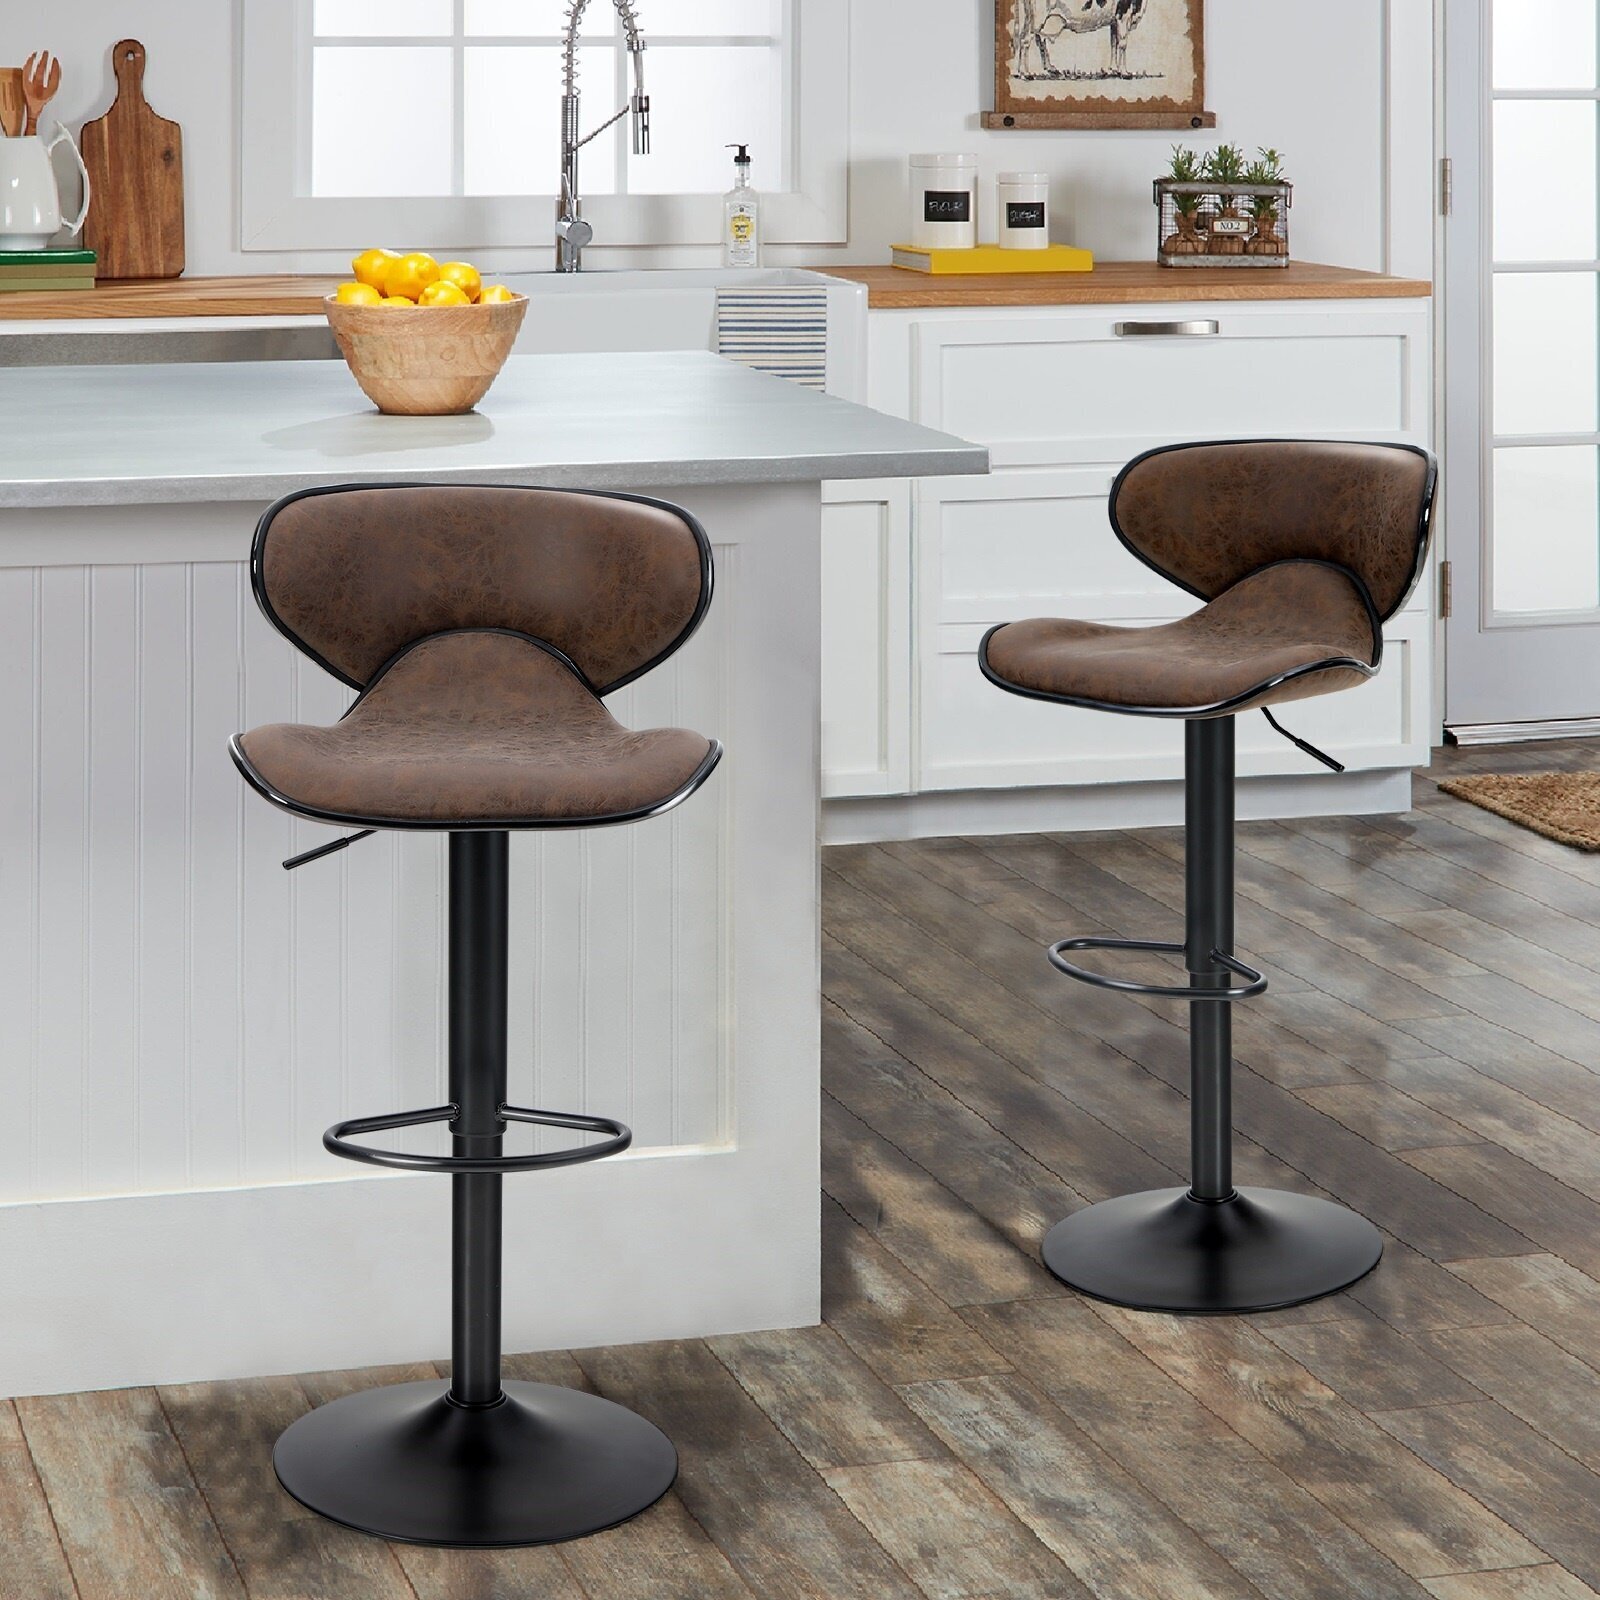 Industrial Swivel Bar Stools With Backs 